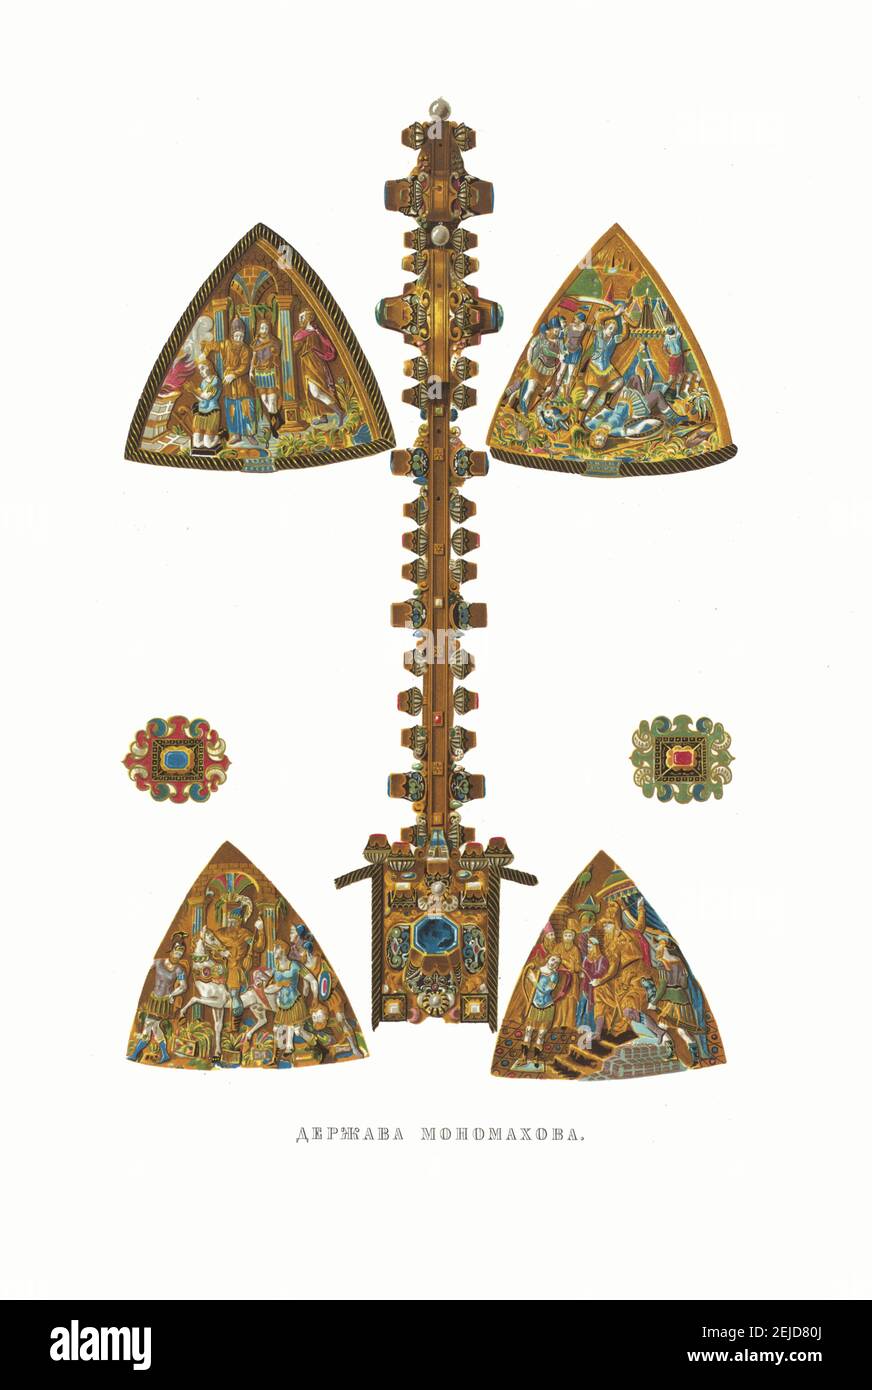 The Monomakh's Globus cruciger. From the Antiquities of the Russian State. Museum: PRIVATE COLLECTION. Author: Fyodor Grigoryevich Solntsev. Stock Photo